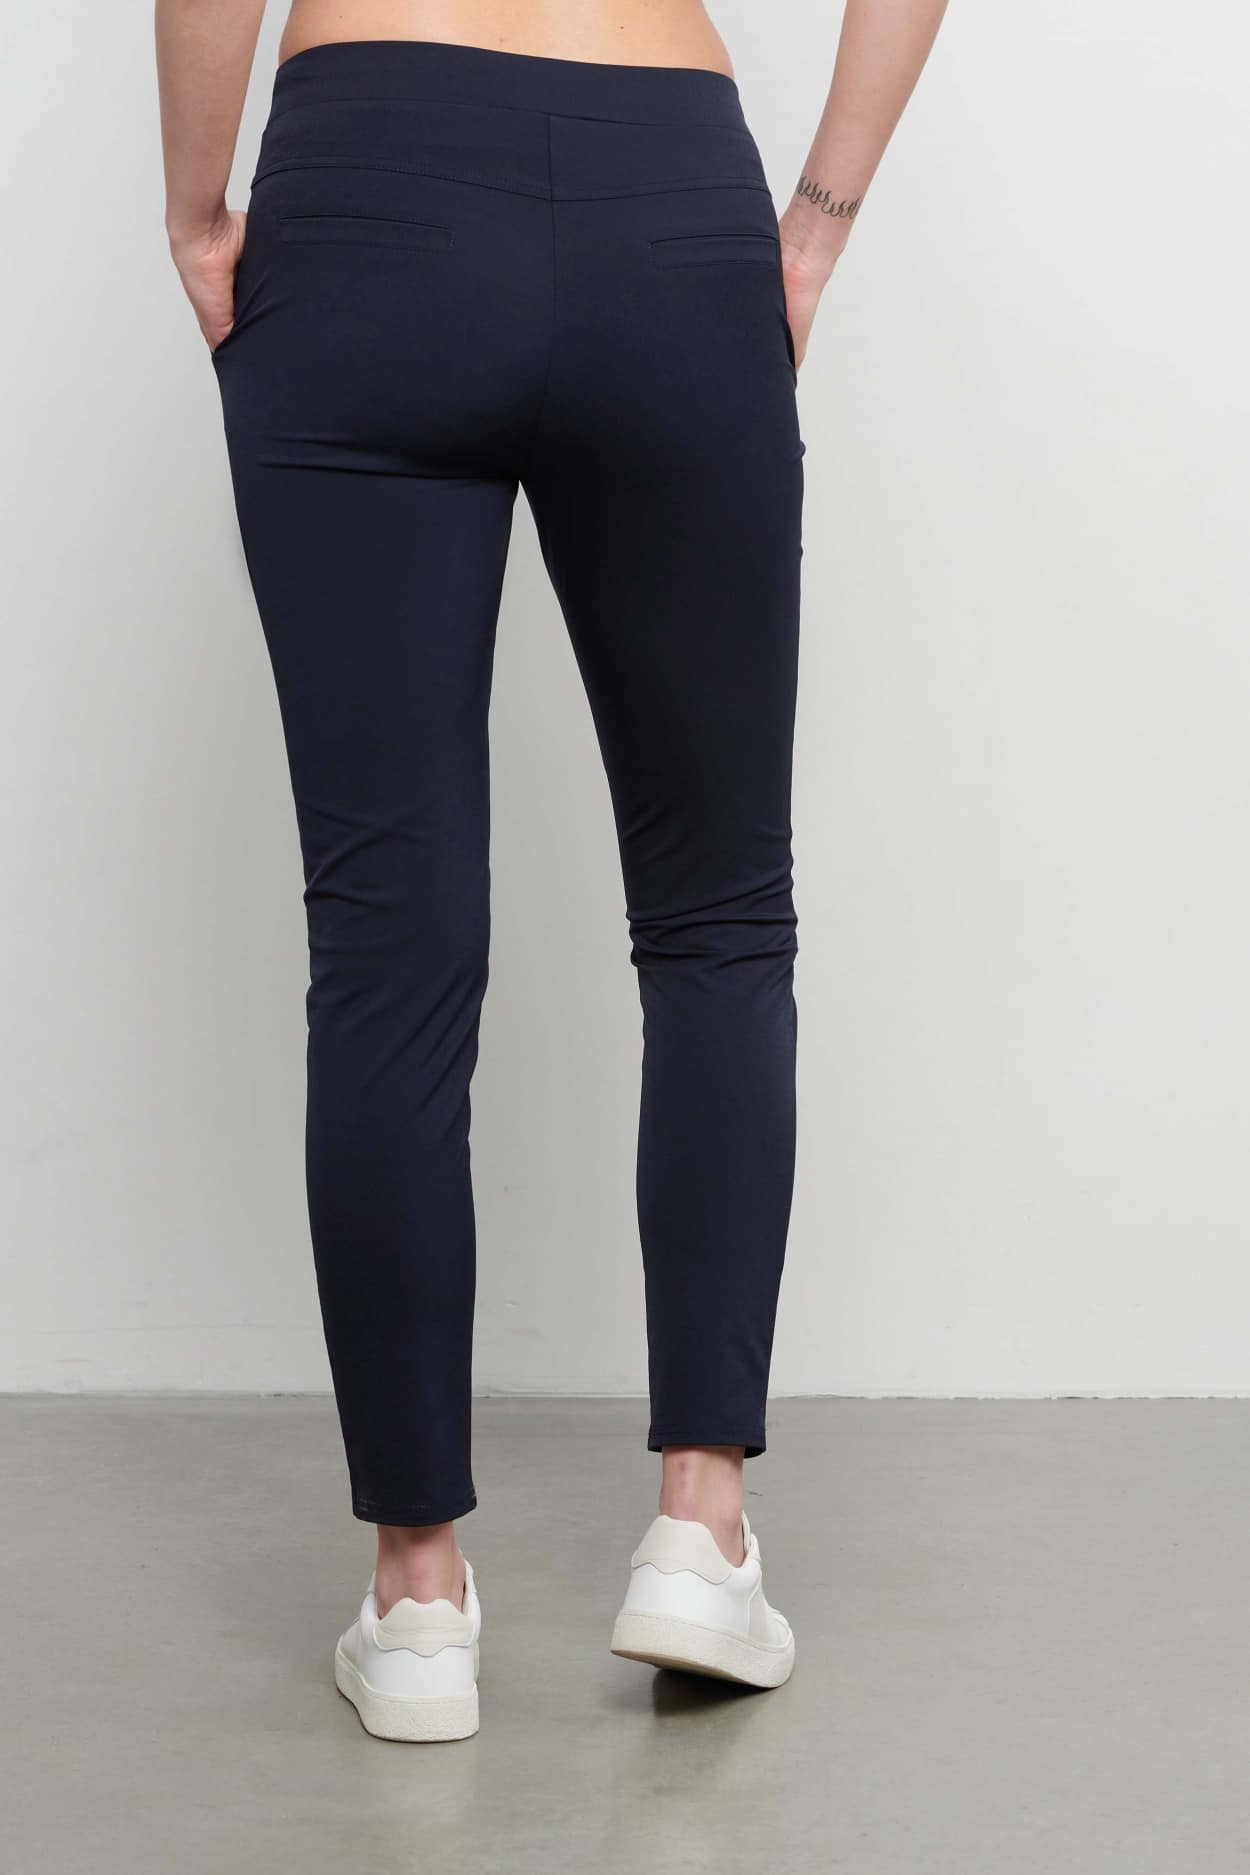 & Co Woman Peppe Travel Pant - Navy